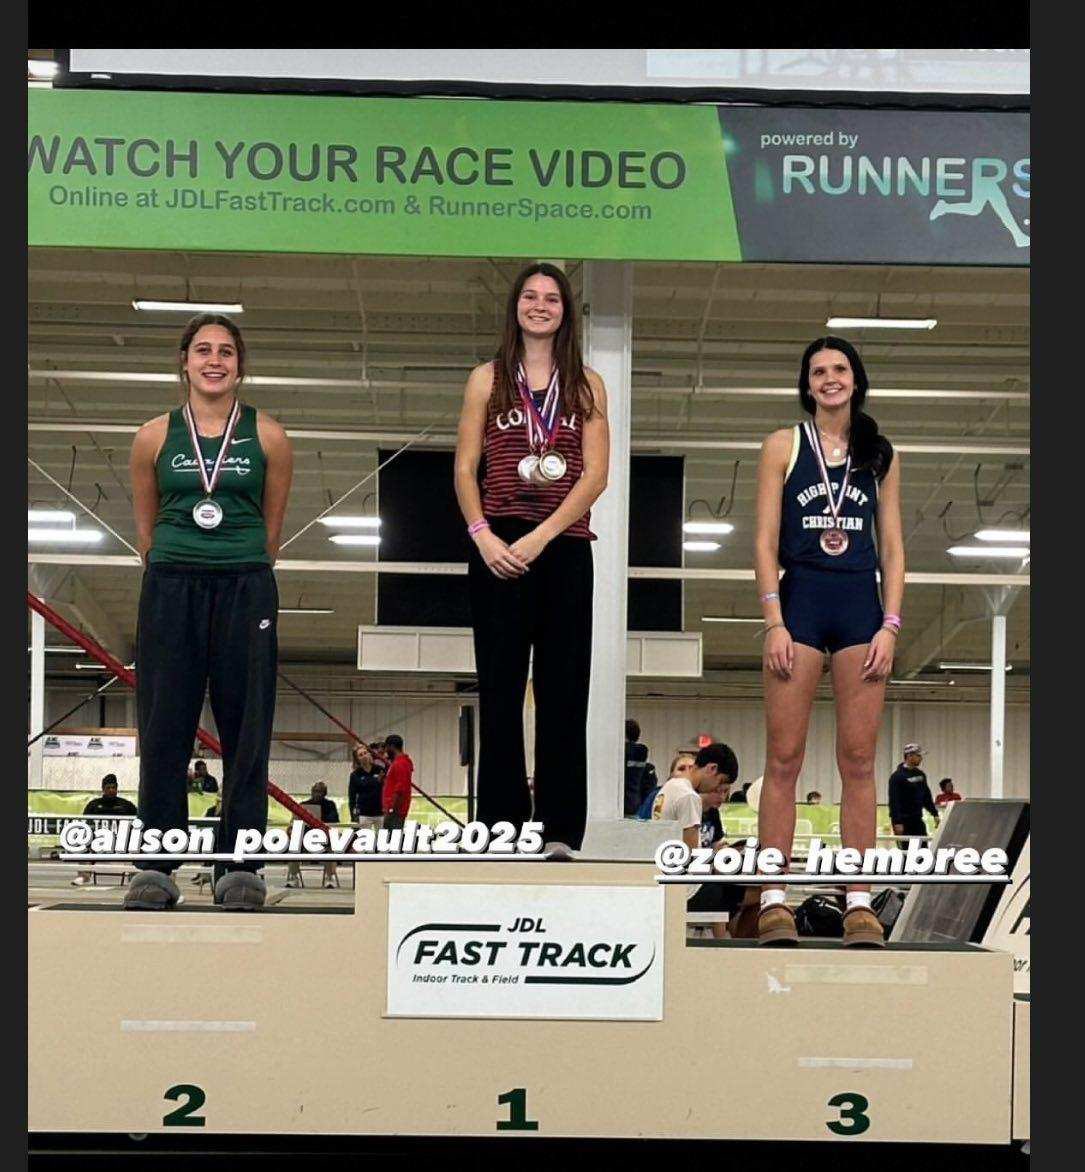 @HPCAXC_TF Congratulations to Zoie Hembree on a 3rd place finish and new pole vault PR of 11’6” at the NCISAA indoor track championship meet! 
#hpcacougars #trackandfield